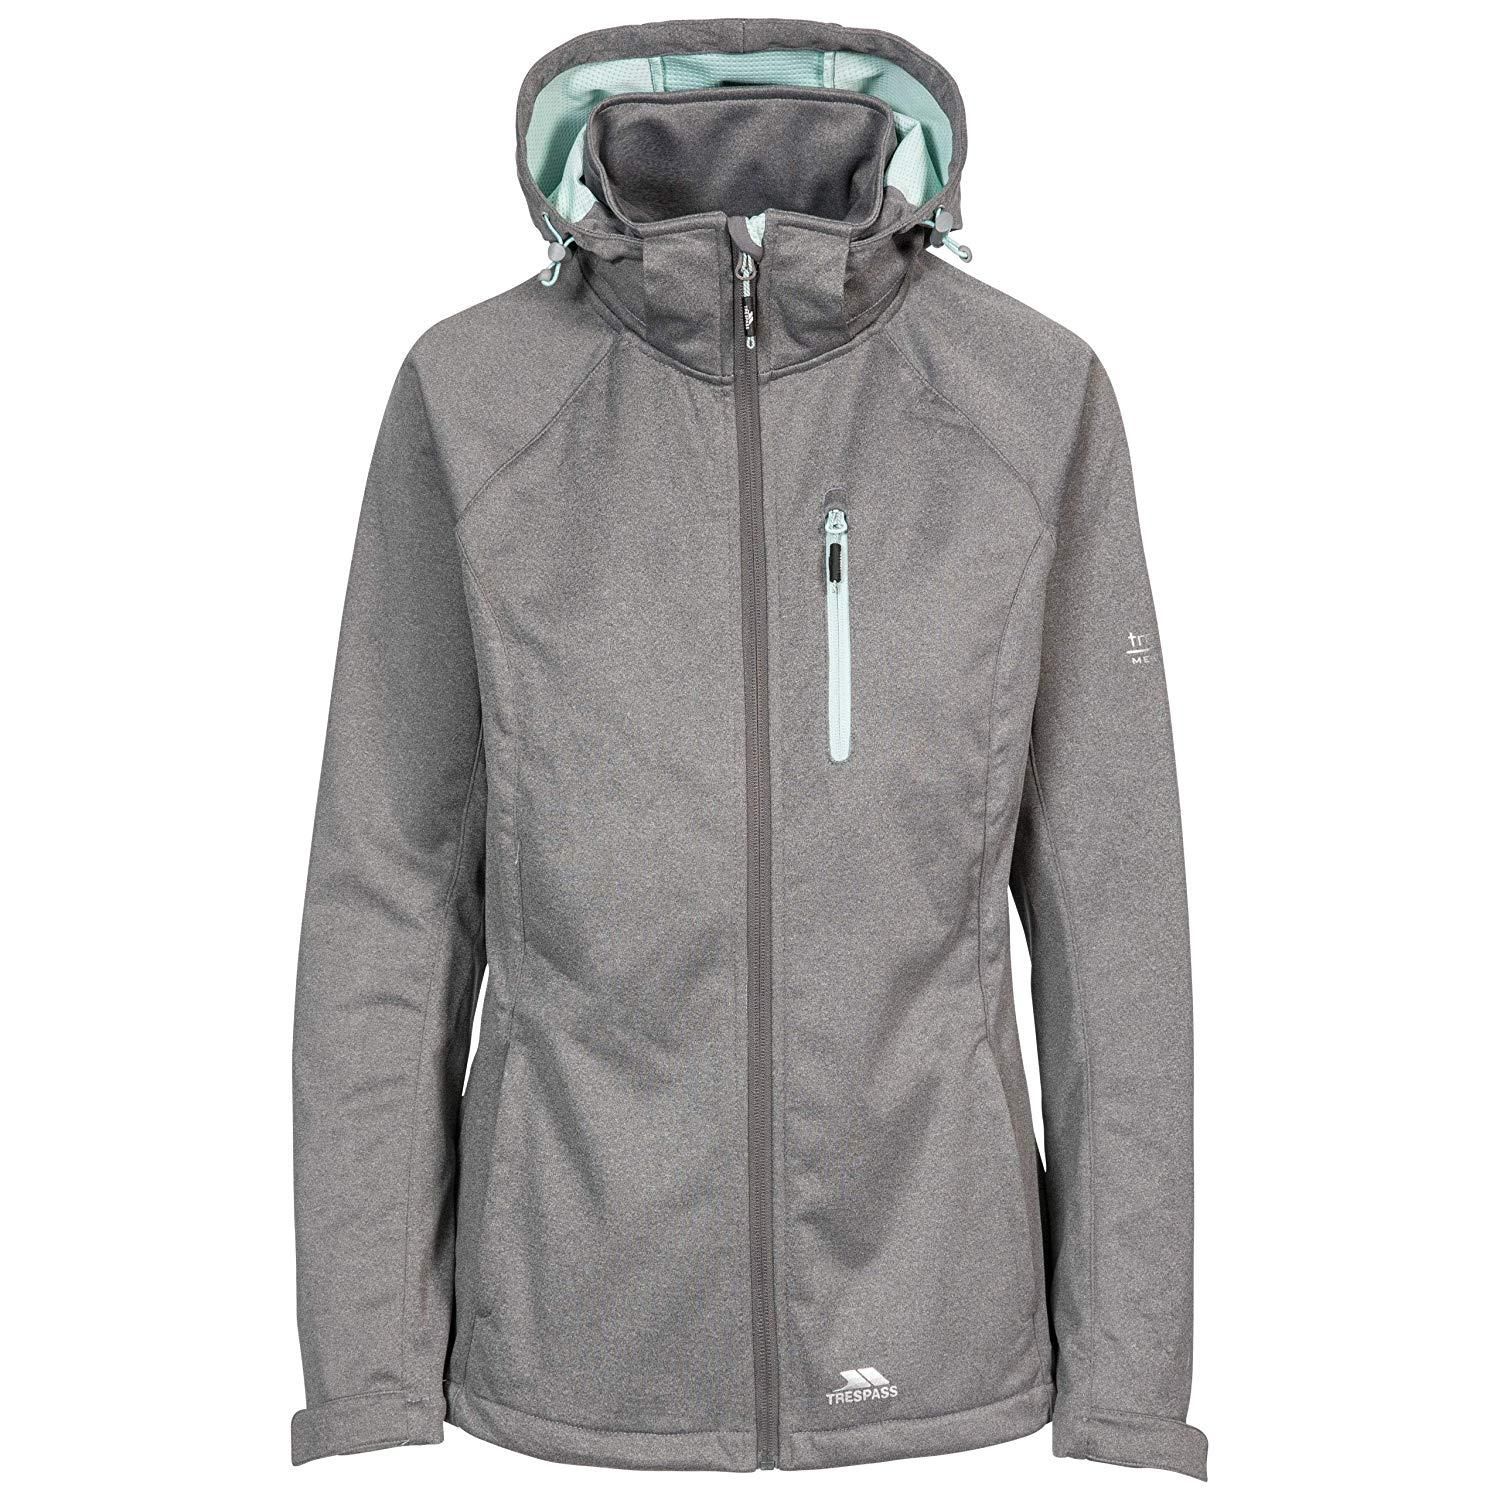 Adjustable zip off hood. Contrast bonded back. 3 zip pockets. Chin guard. Flat cuff with tab. Contrast trims. Drawcord at hem. Waterproof 8000mm, breathable 3000mvp, windproof. 100% Polyester, TPU membrane. Trespass Womens Chest Sizing (approx): XS/8 - 32in/81cm, S/10 - 34in/86cm, M/12 - 36in/91.4cm, L/14 - 38in/96.5cm, XL/16 - 40in/101.5cm, XXL/18 - 42in/106.5cm.